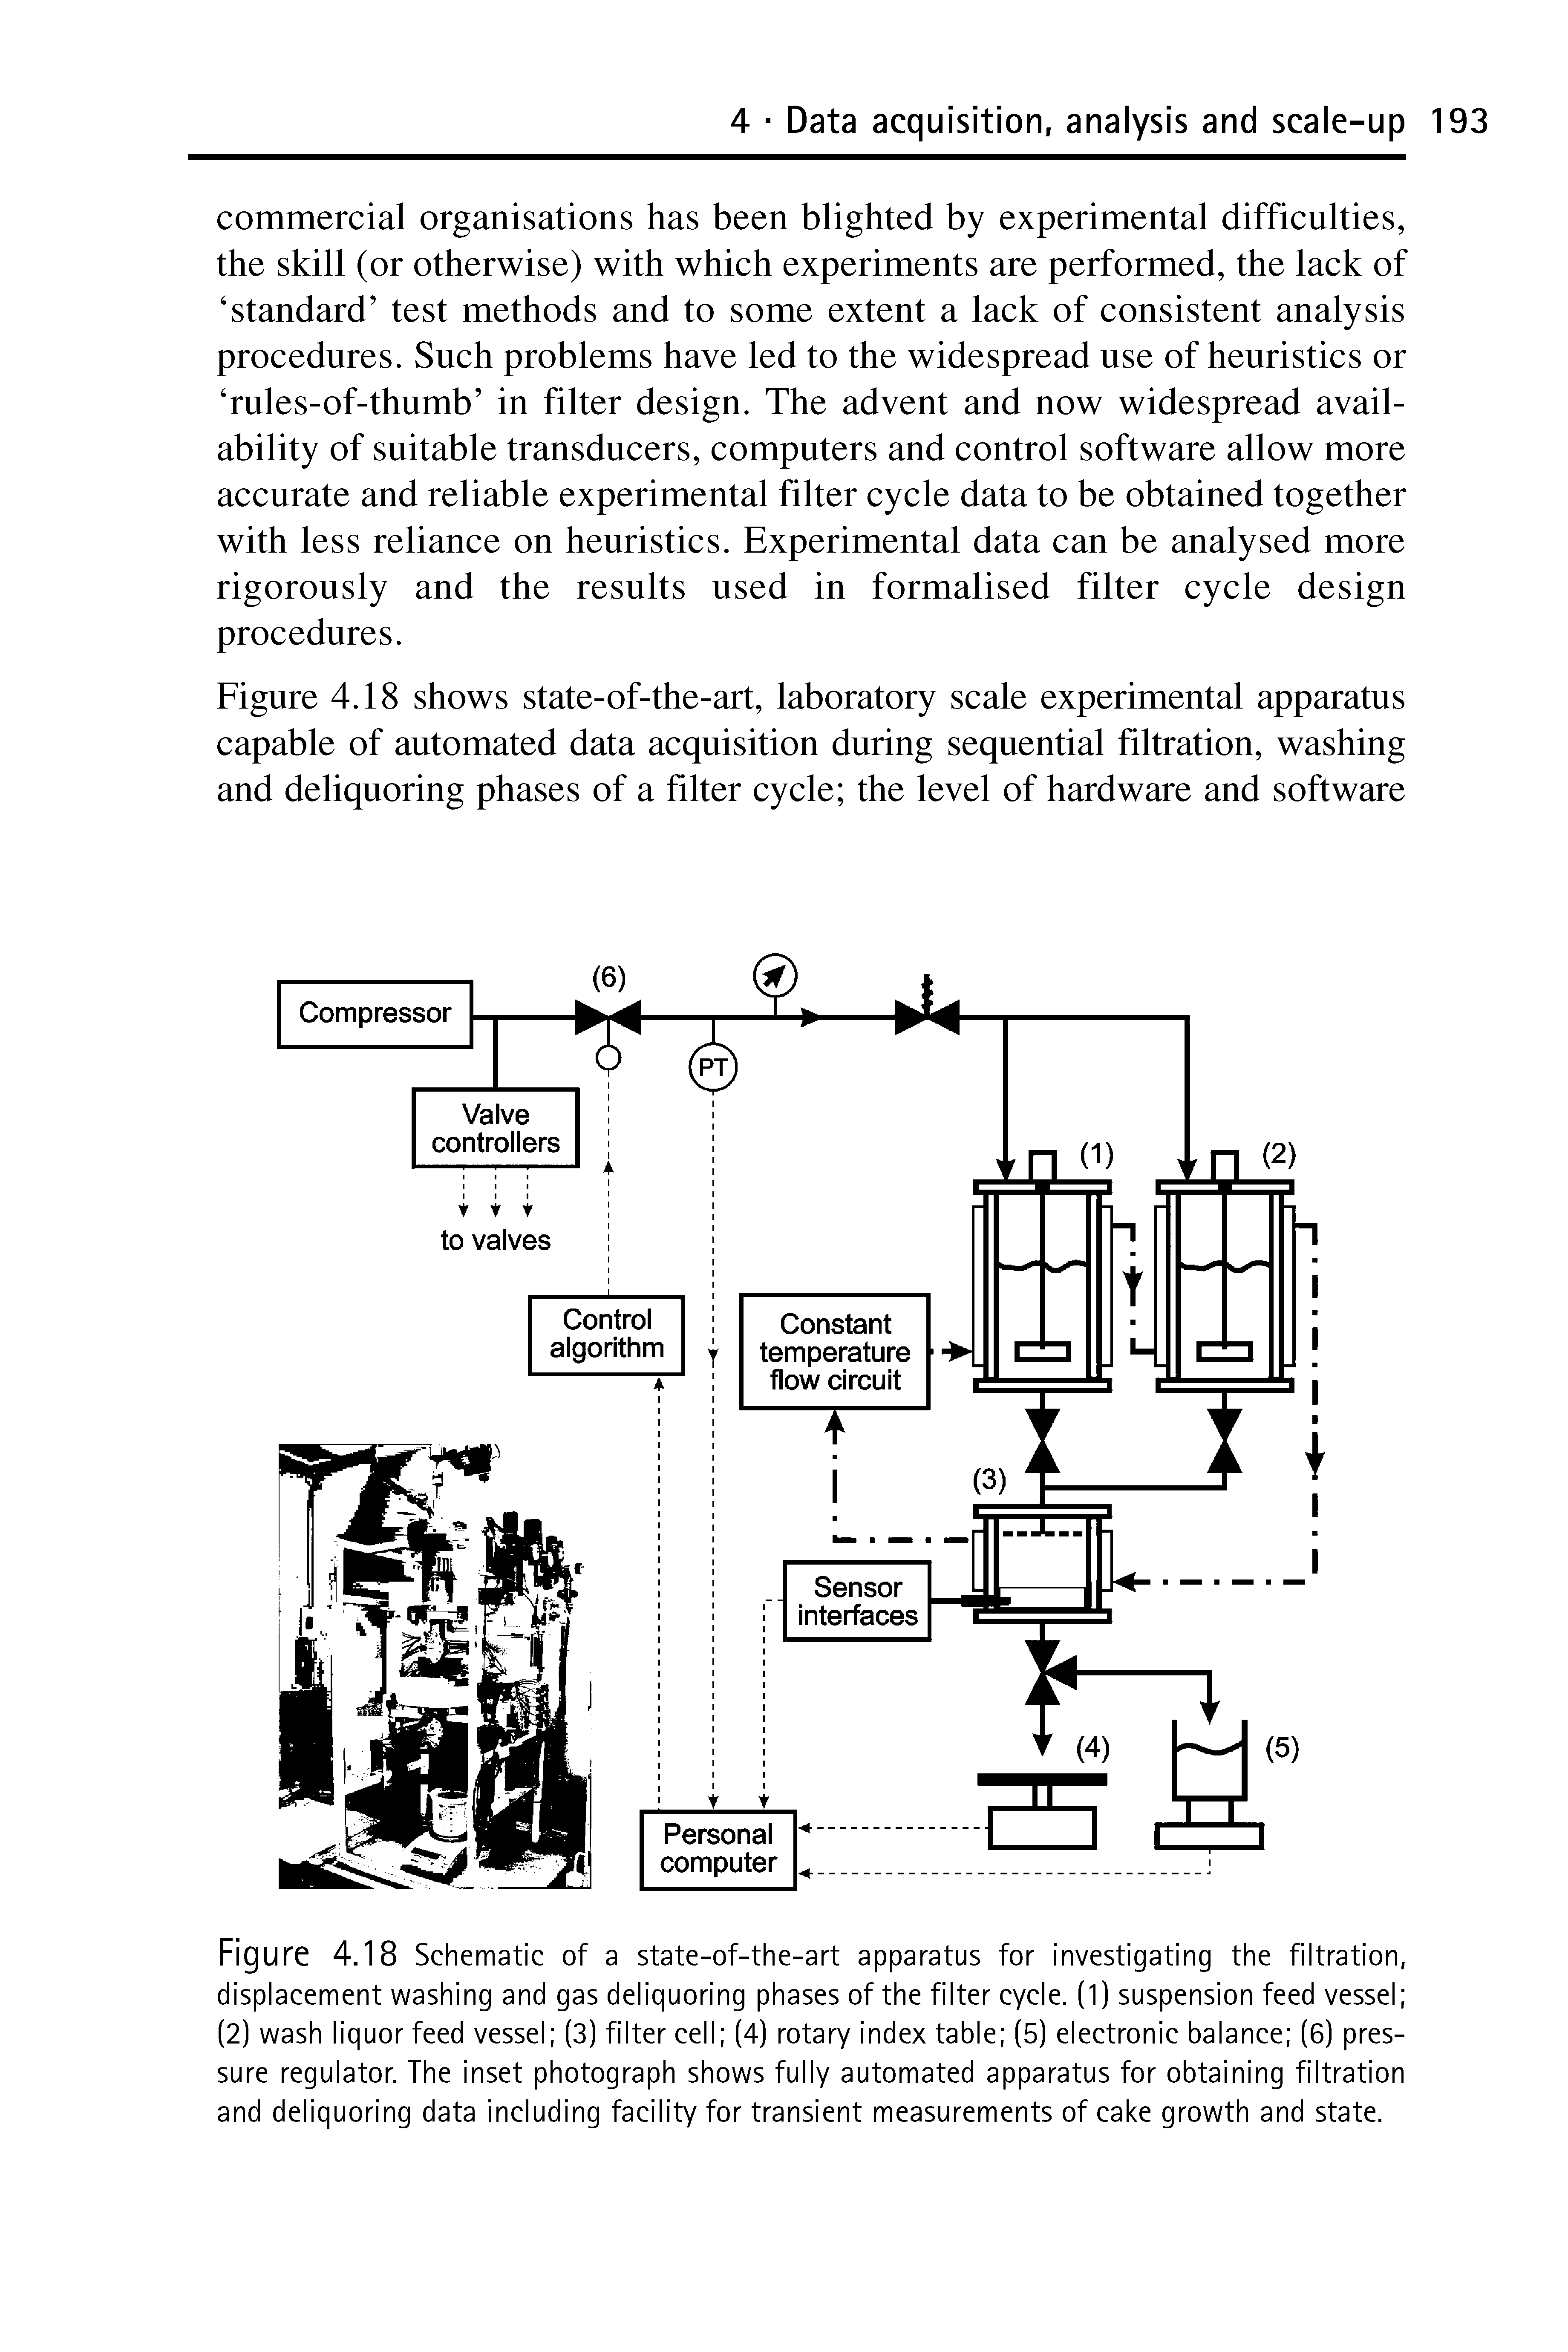 Figure 4.18 Schematic of a state-of-the-art apparatus for investigating the filtration, displacement washing and gas deliquoring phases of the filter cycle. (1) suspension feed vessel (2) wash liquor feed vessel (3) filter cell (4) rotary index table (5) electronic balance (6) pressure regulator. The inset photograph shows fully automated apparatus for obtaining filtration and deliquoring data including facility for transient measurements of cake growth and state.